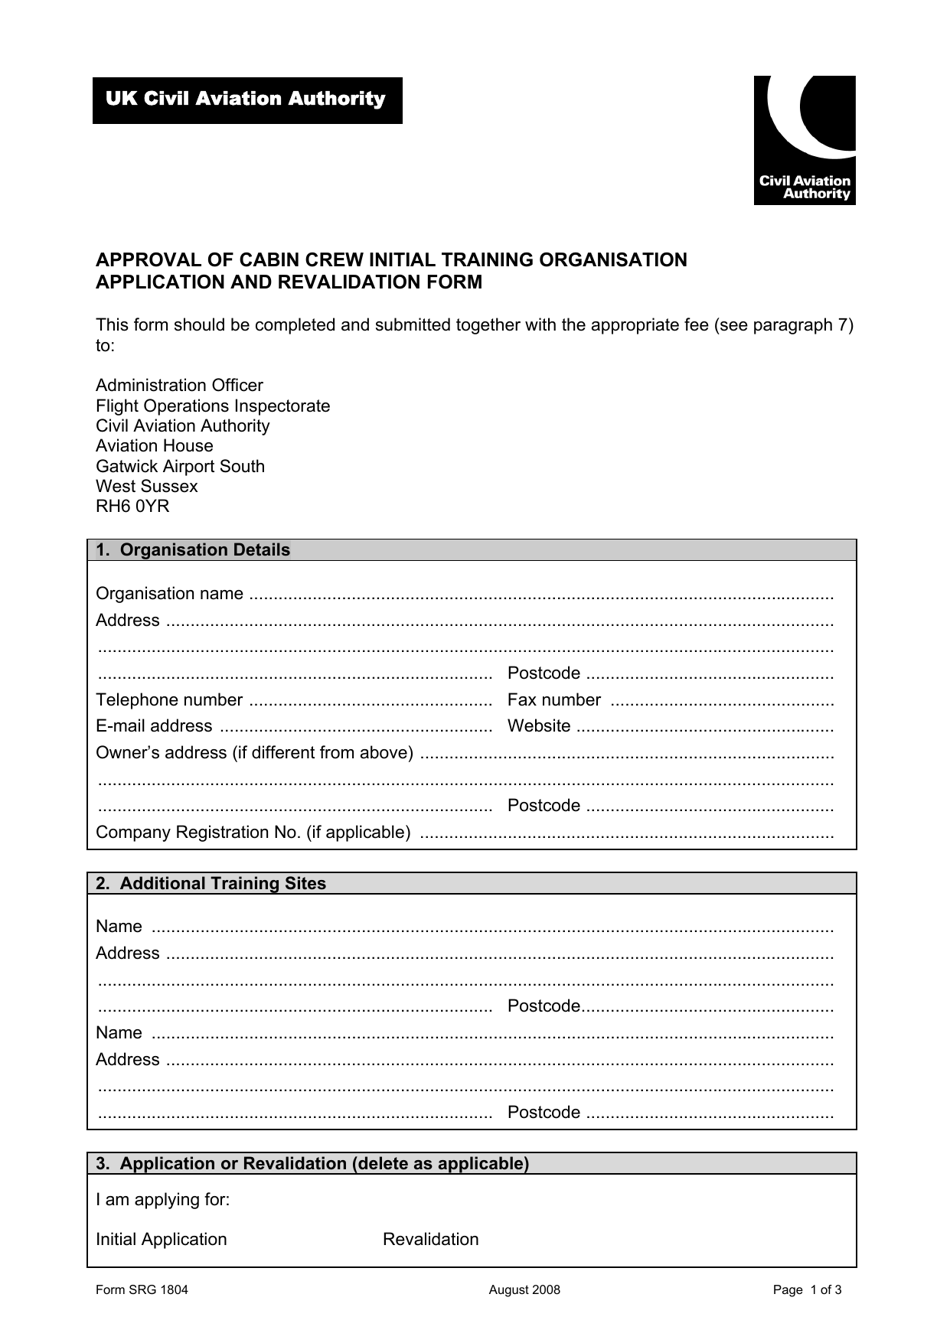 Form SRG1804 Approval of Cabin Crew Initial Training Organisation Application and Revalidation Form - United Kingdom, Page 1